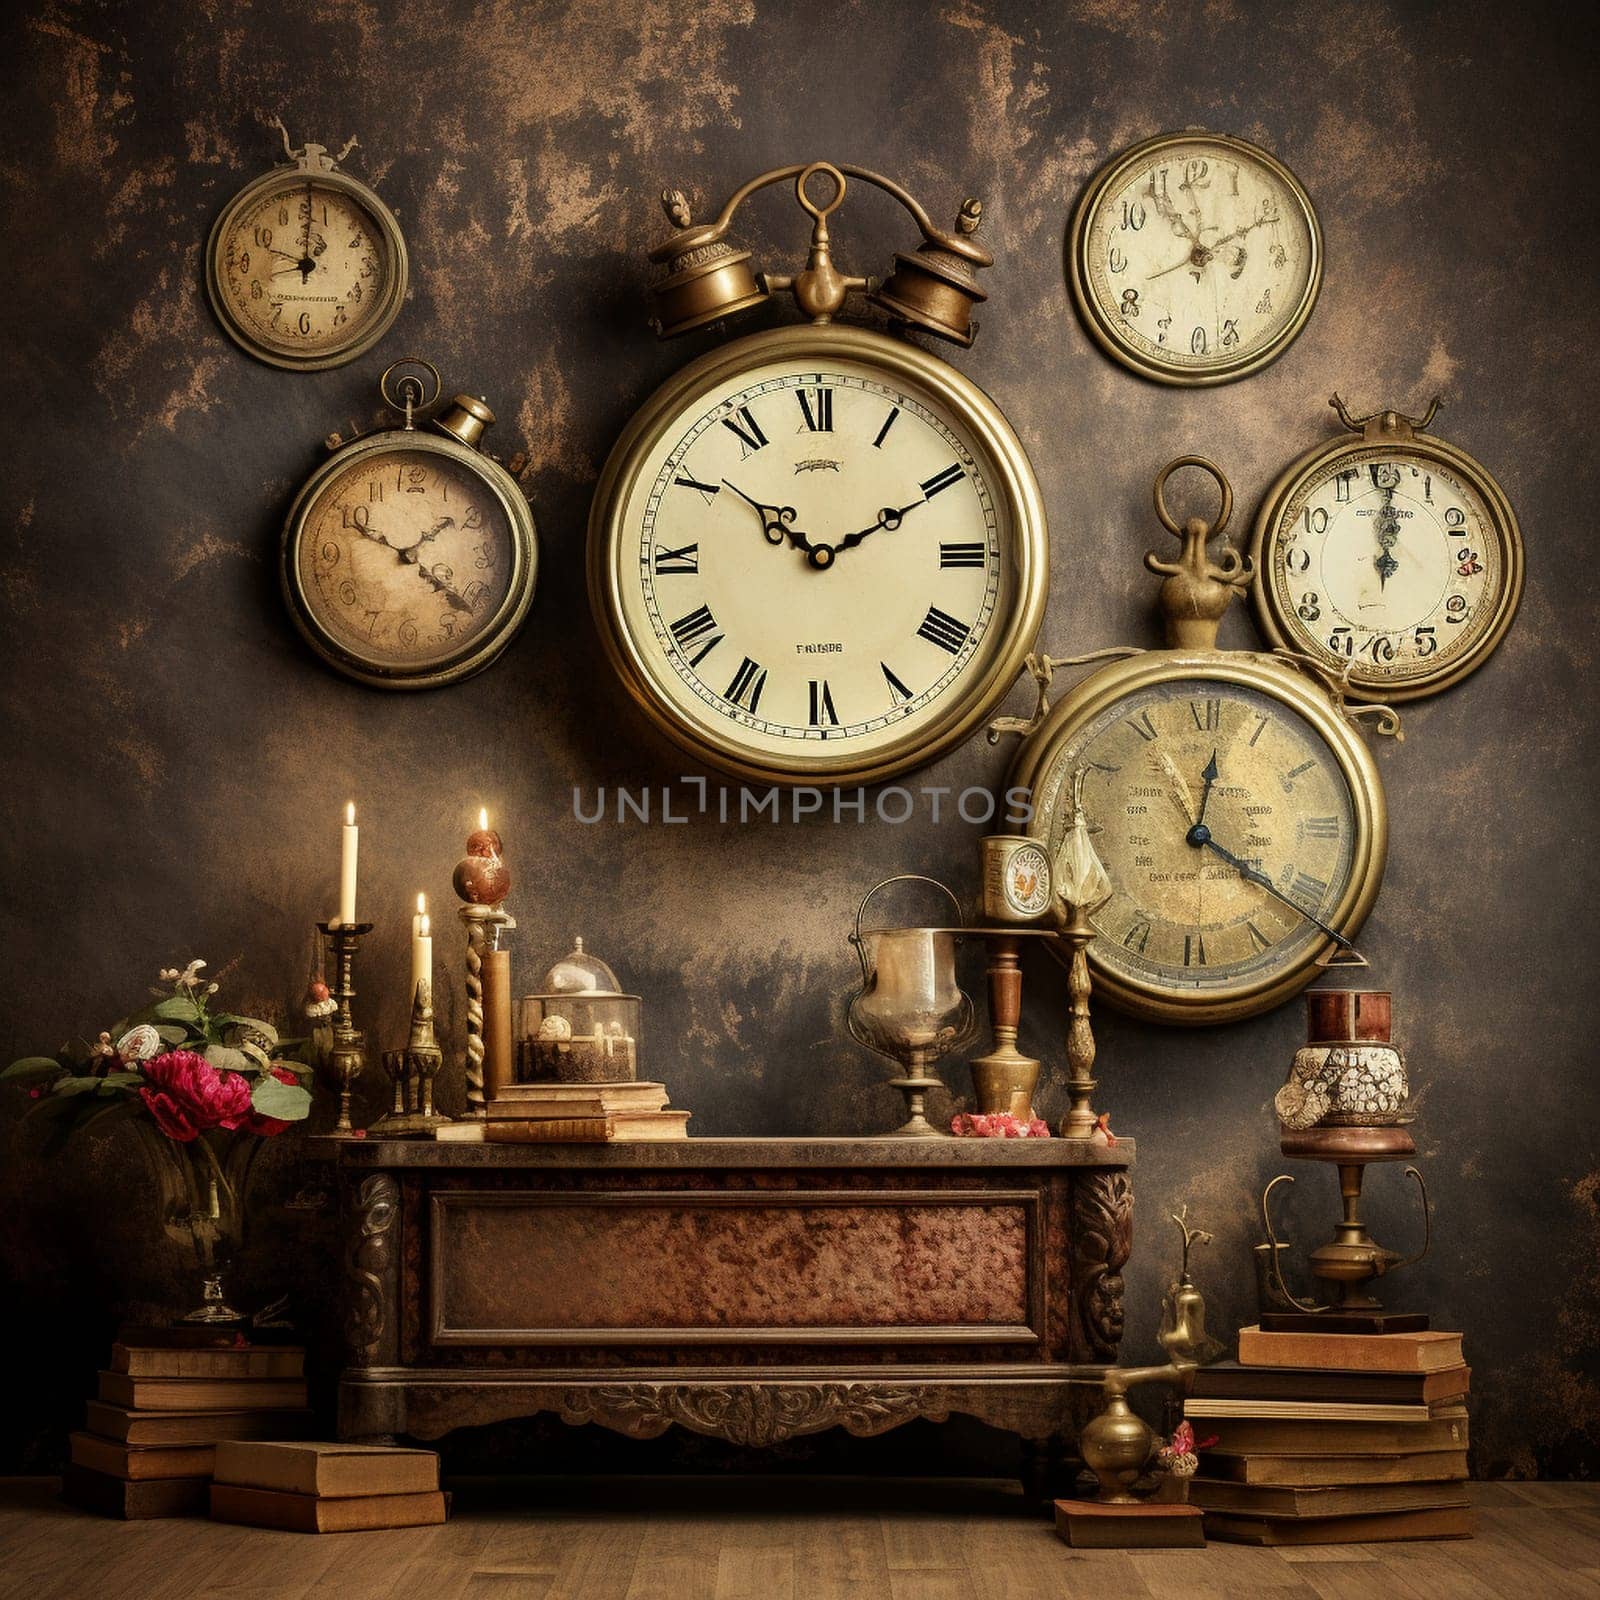 Transport yourself back in time with this captivating image of vintage clocks arranged creatively in a retro aesthetic. Each clock showcases intricate details and unique designs that will mesmerize any viewer. Bathed in warm, nostalgic lighting, this scene immerses you in the enchanting world of vintage vibes. A subtle touch of whimsy is added by integrating musical elements, such as musical notes or instruments, into the composition, evoking a sense of timeless melodies brought to life by these vintage clocks.